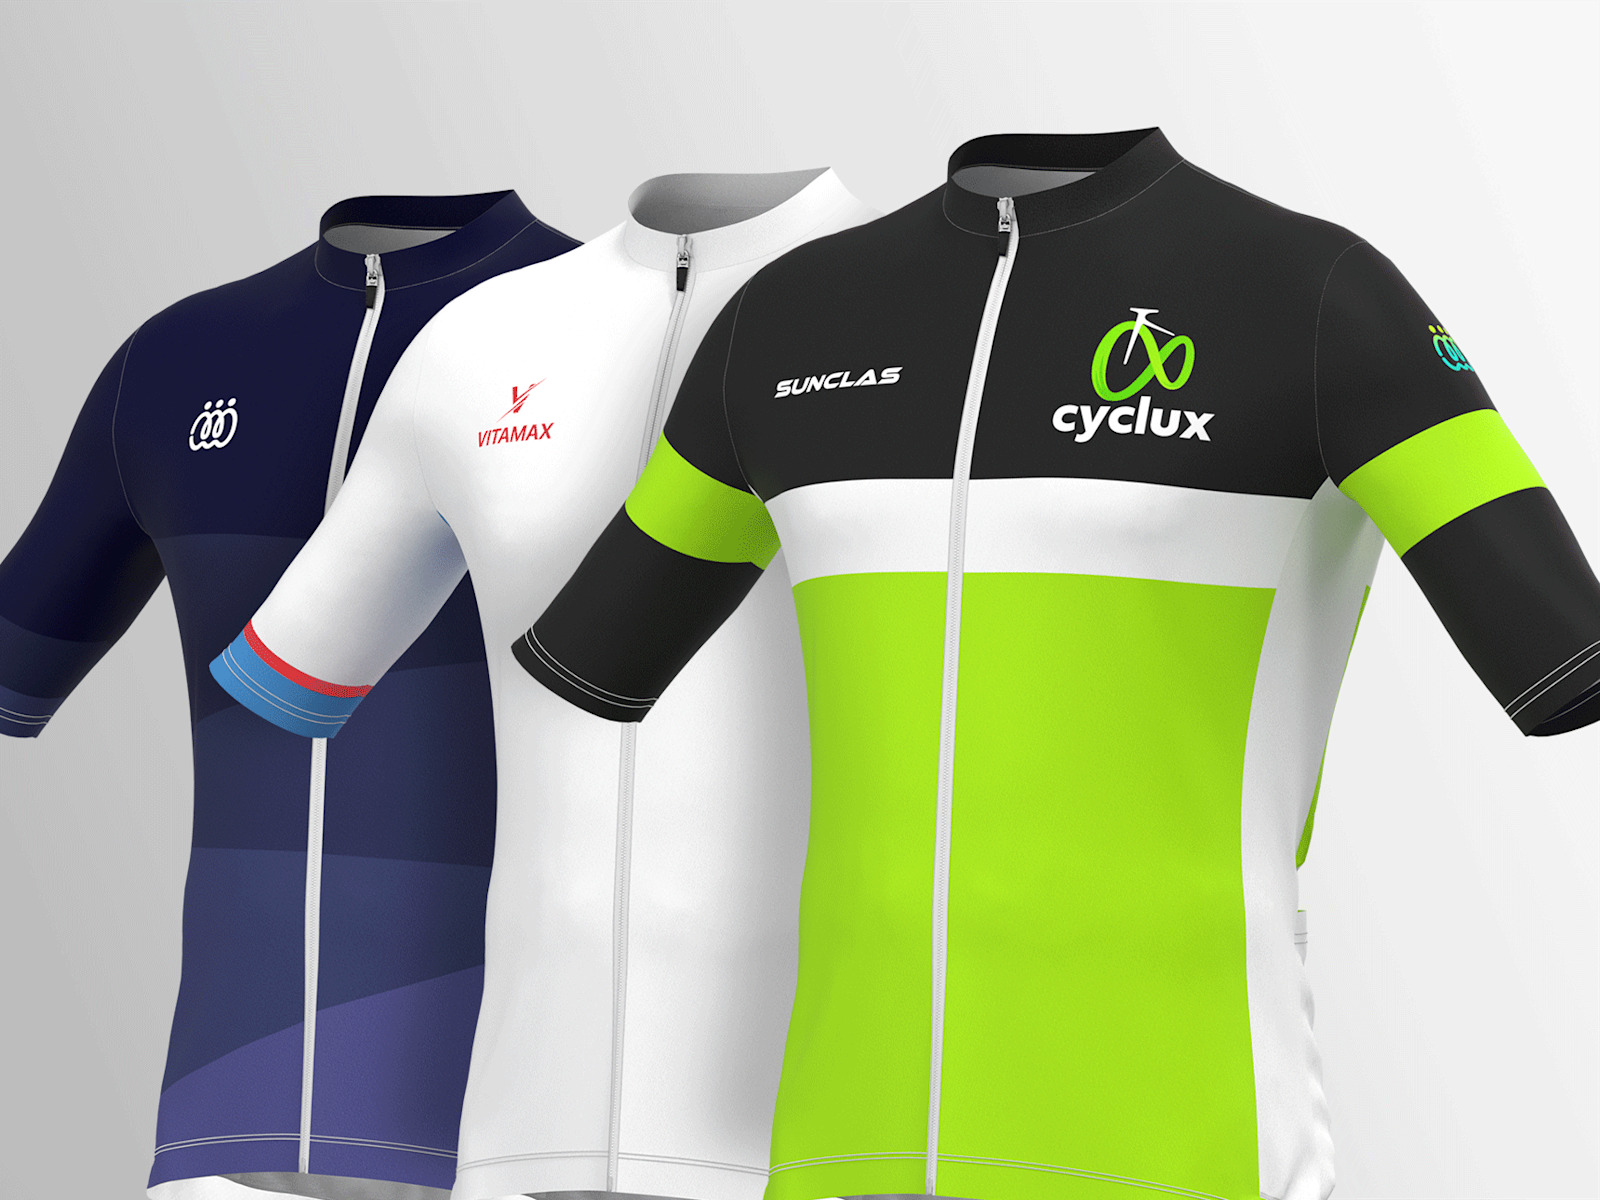 Full Sublimation Customized Cycling Jersey for Men - Customized